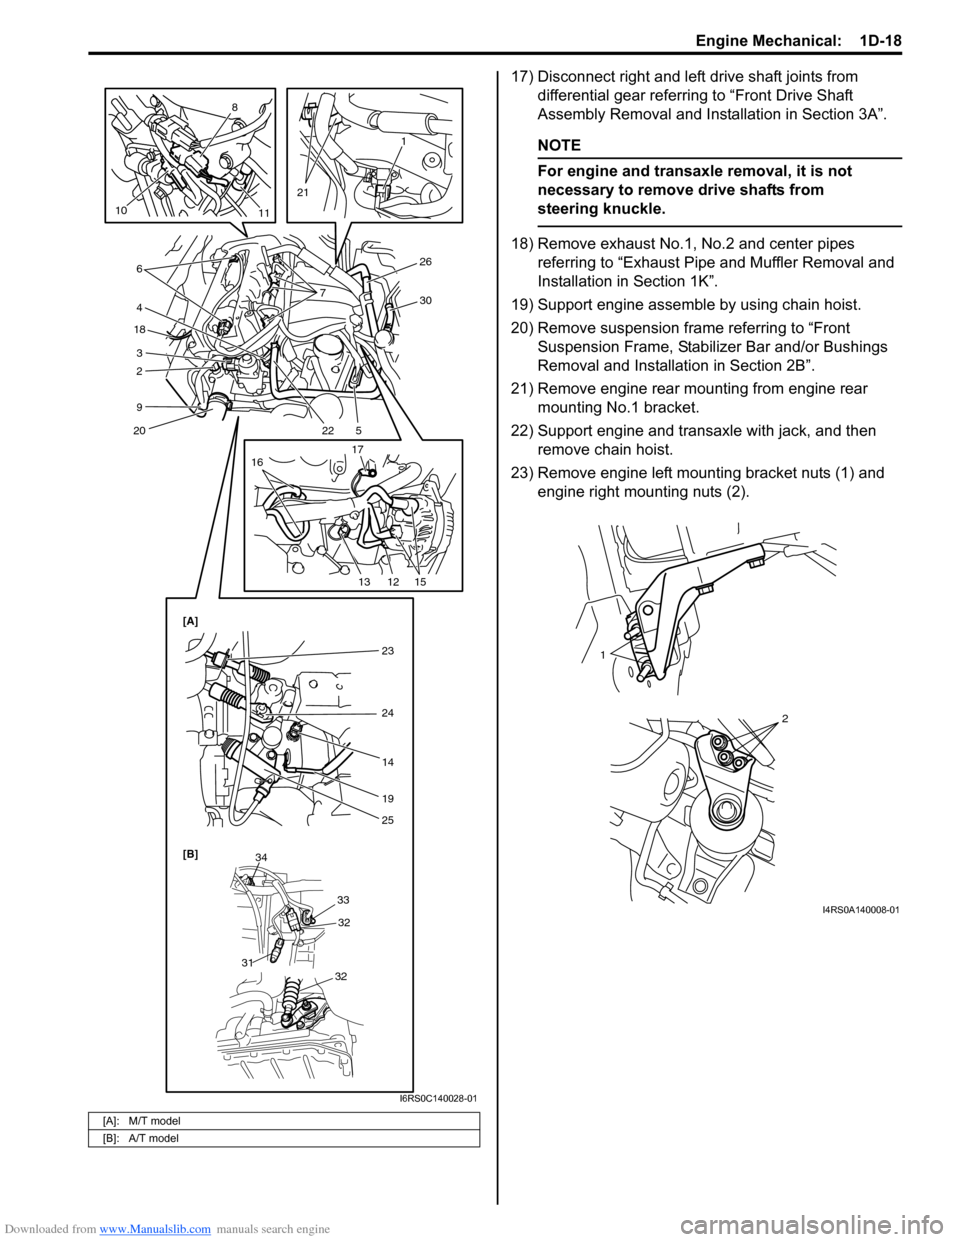 SUZUKI SWIFT 2007 2.G Service Workshop Manual Downloaded from www.Manualslib.com manuals search engine Engine Mechanical:  1D-18
17) Disconnect right and left drive shaft joints from differential gear referring to “Front Drive Shaft 
Assembly R